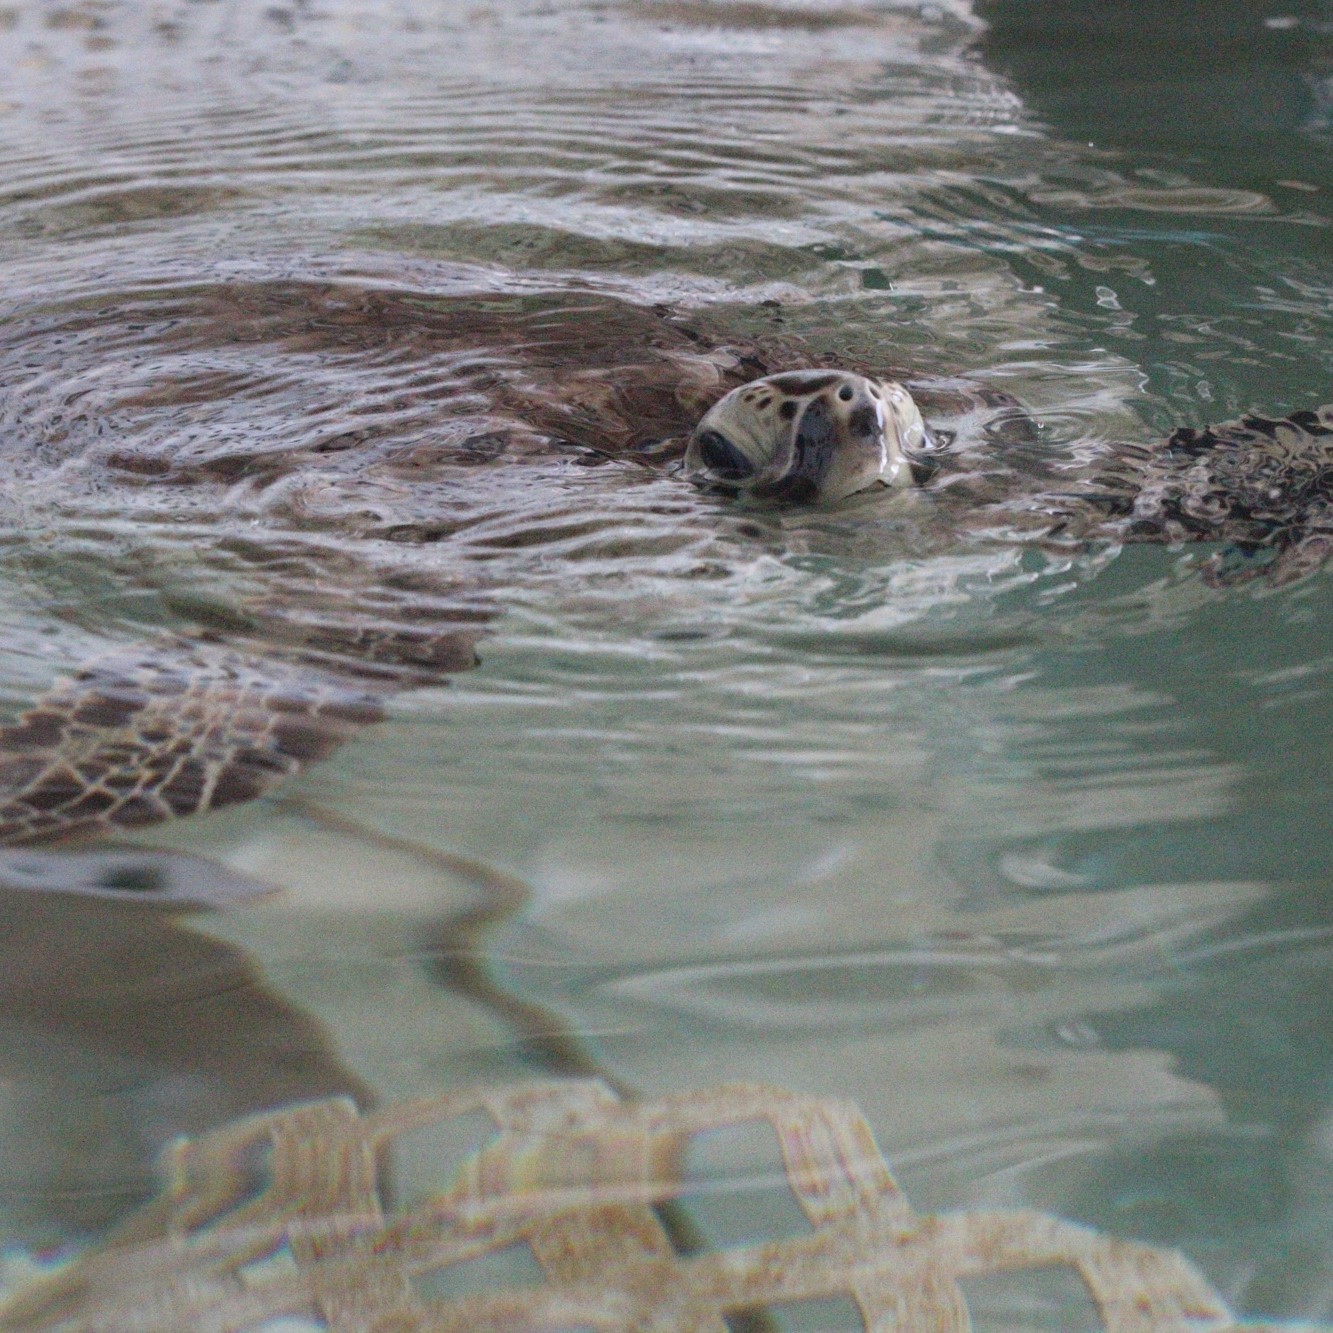 Sea turtle picture taken by the Palm Coast Observer at the Sea Turtle Hospital